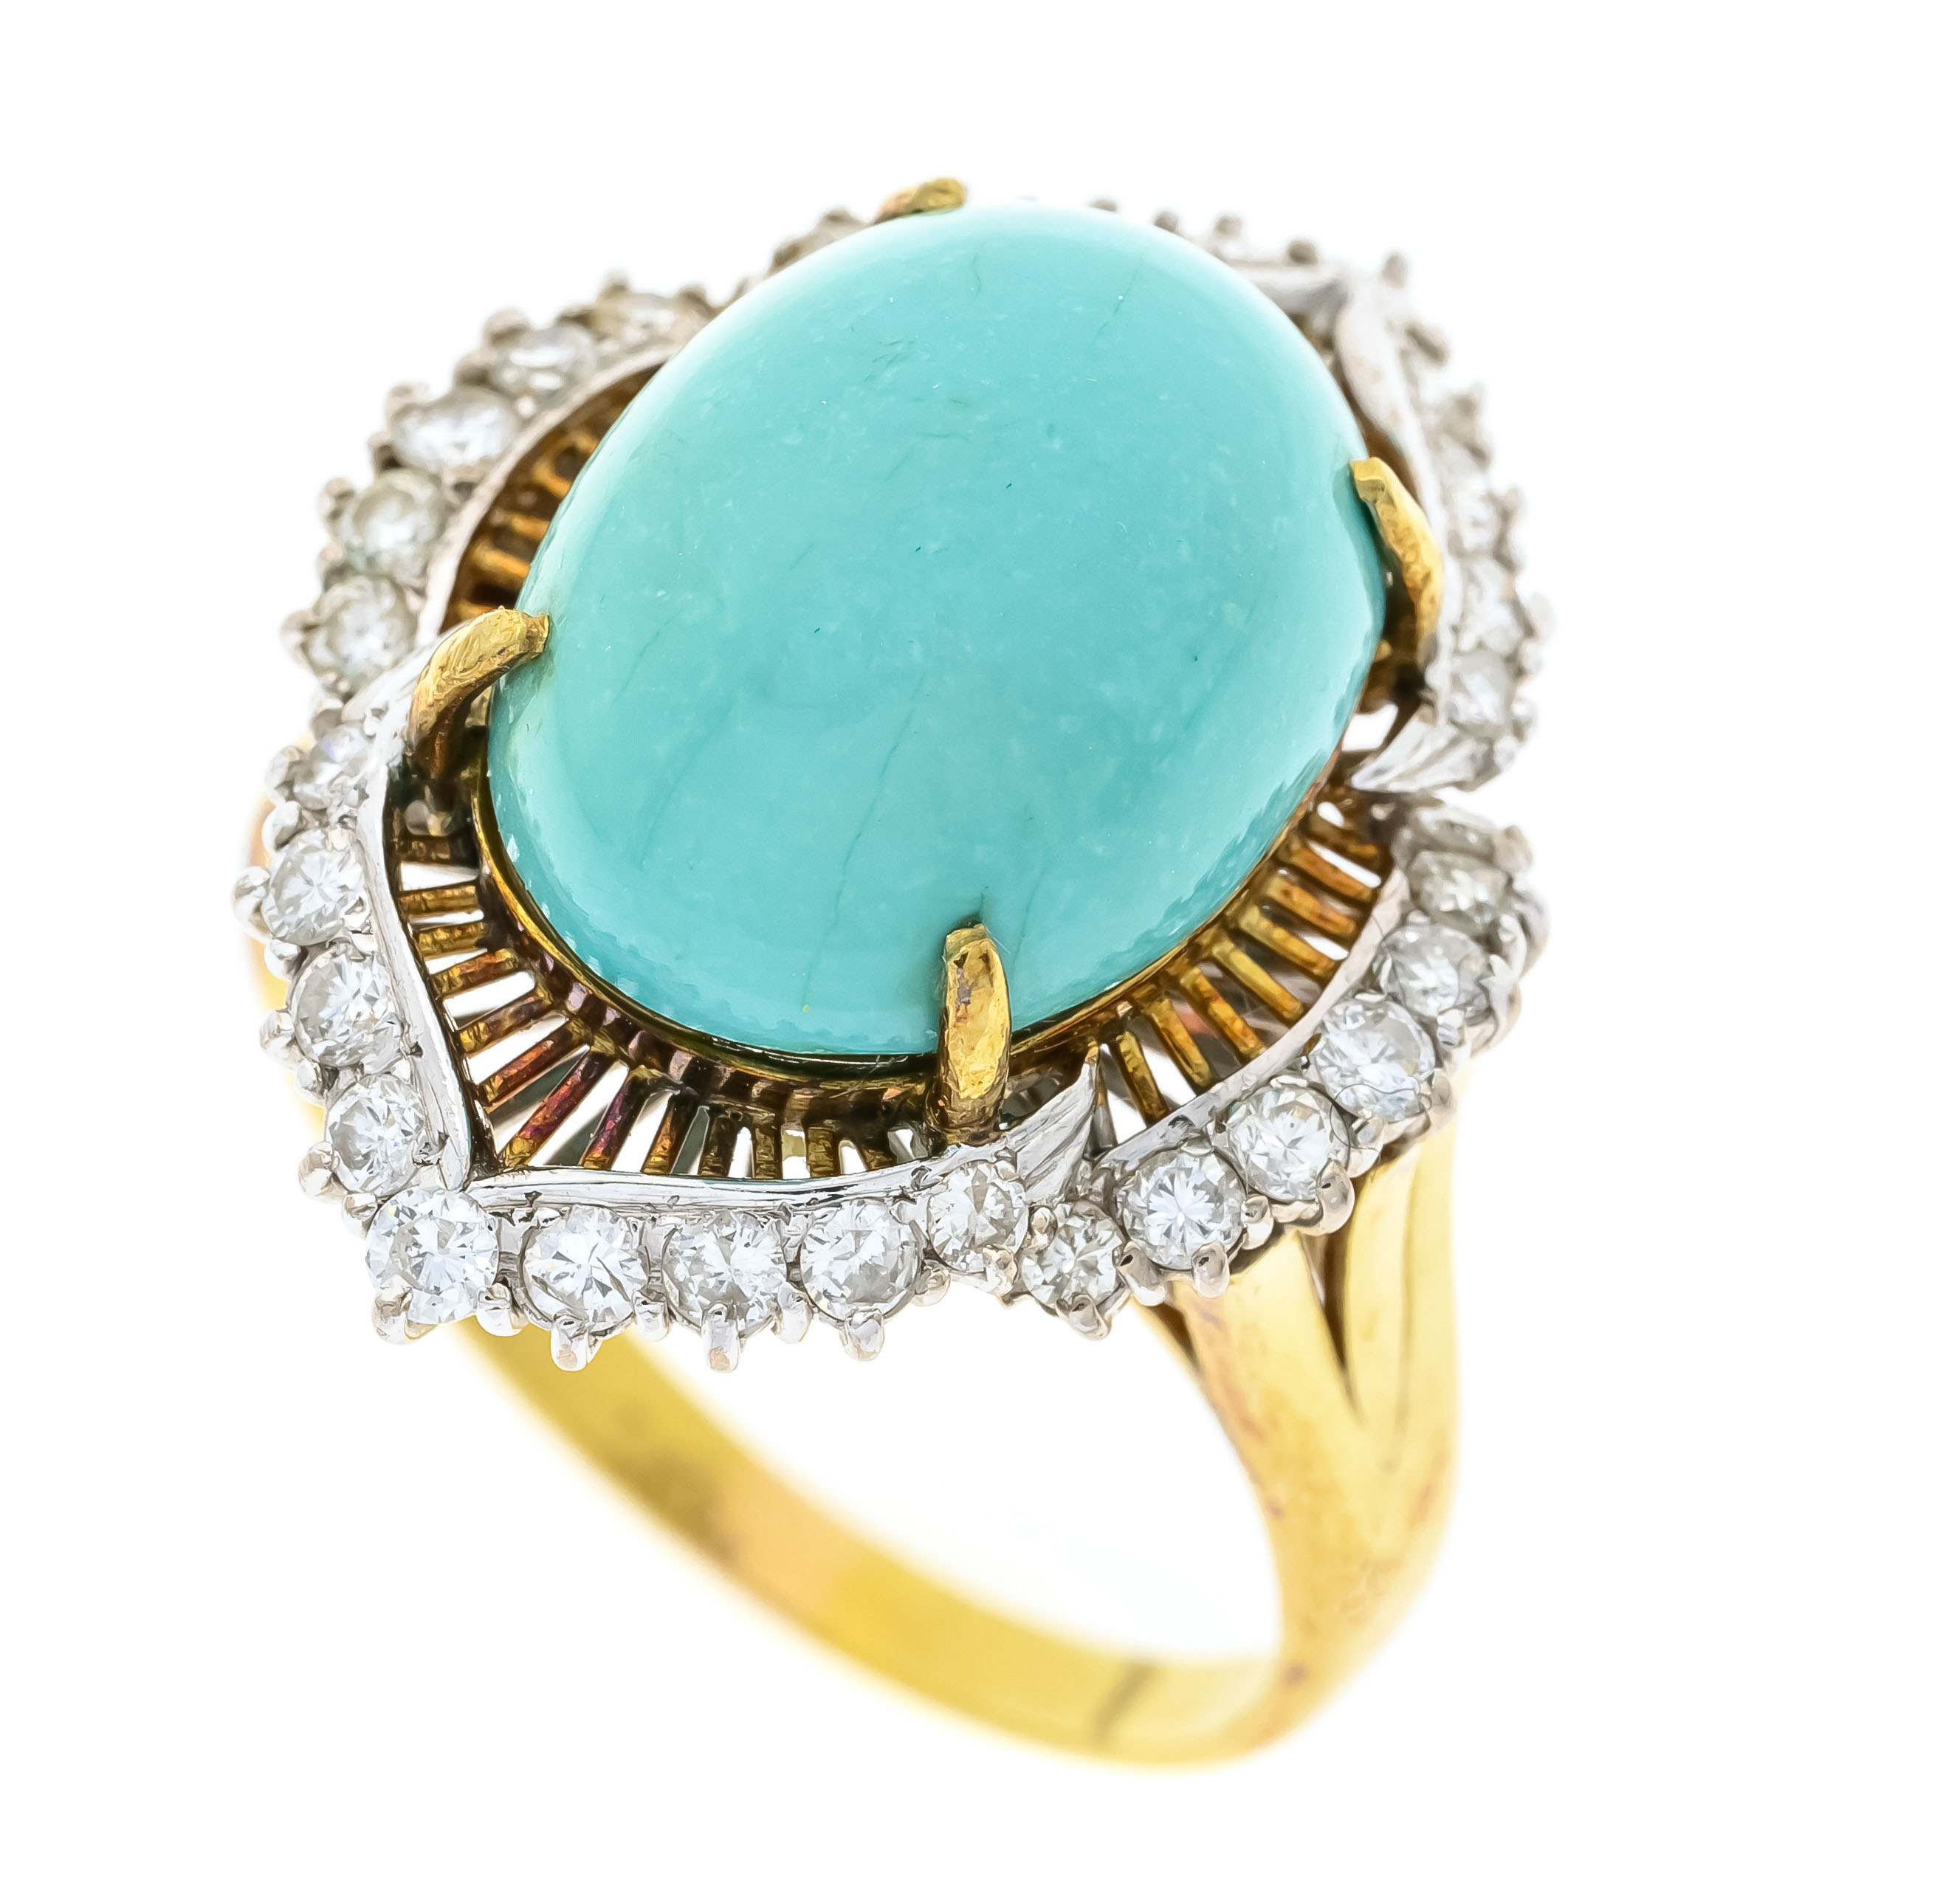 Turquoise diamond ring GG/WG 750/000 with one oval turquoise cabochon 15 x 11.5 mm and 32